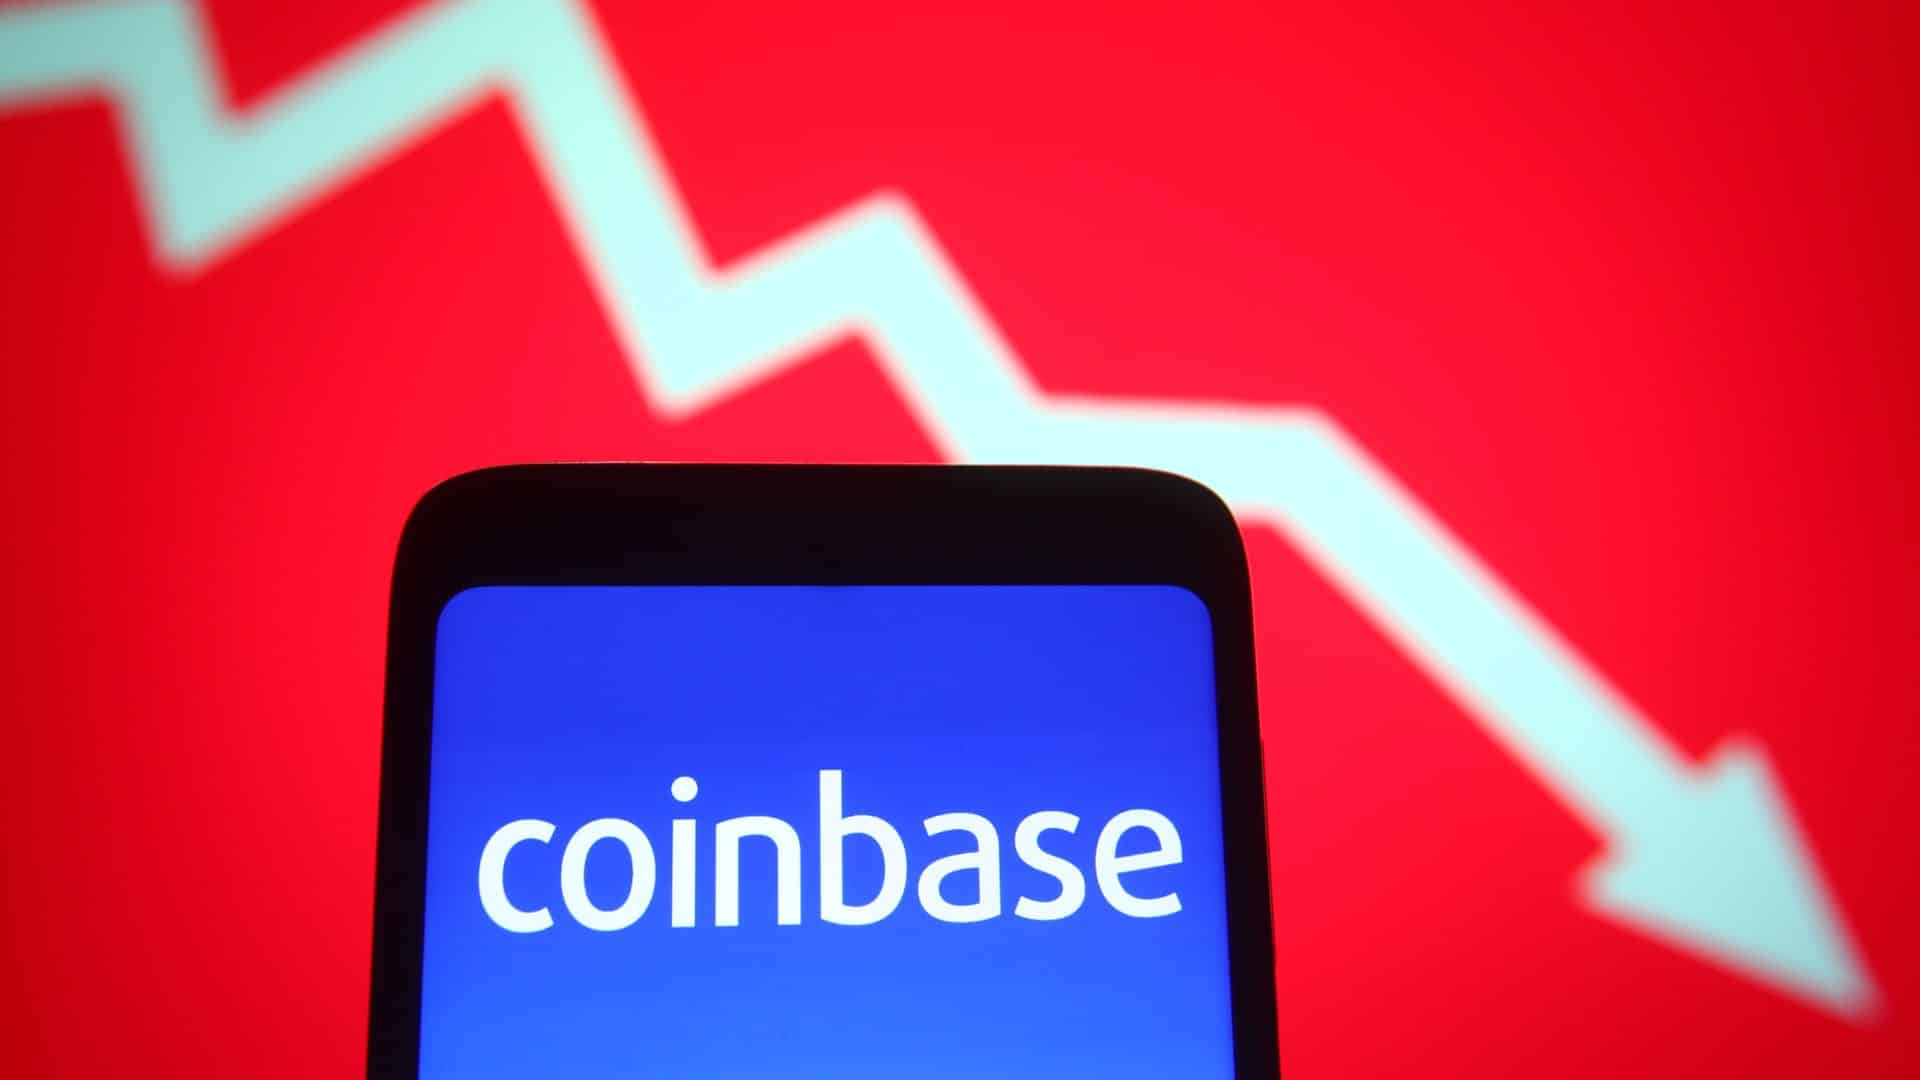 Coinbase shares are down nearly 50% from ATH